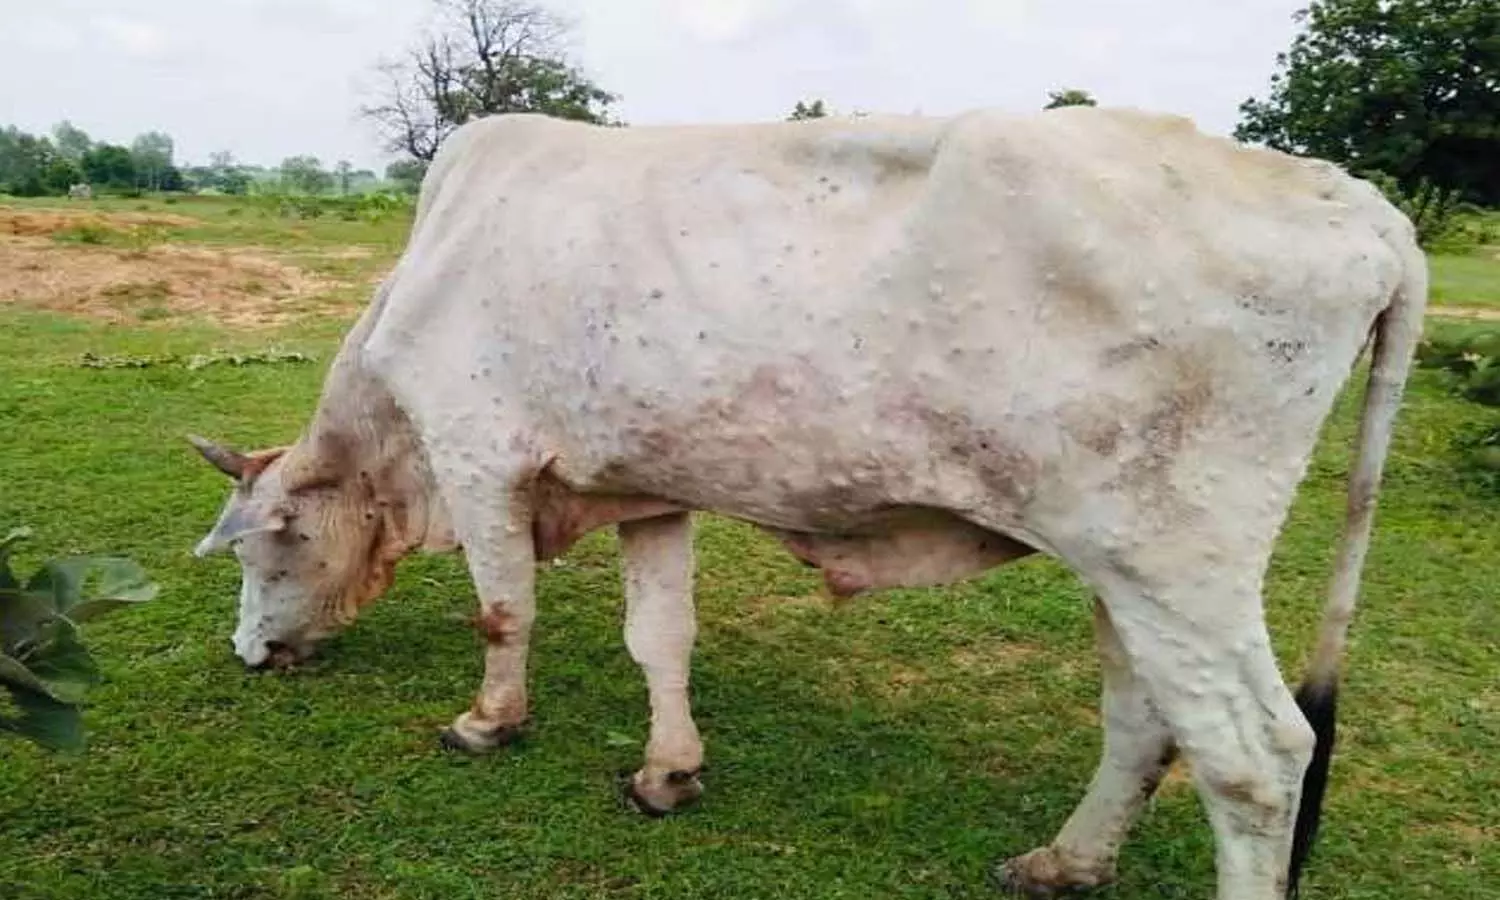 Lumpy skin disease in animals of Rajasthan and Gujarat, hundreds of cattle have died